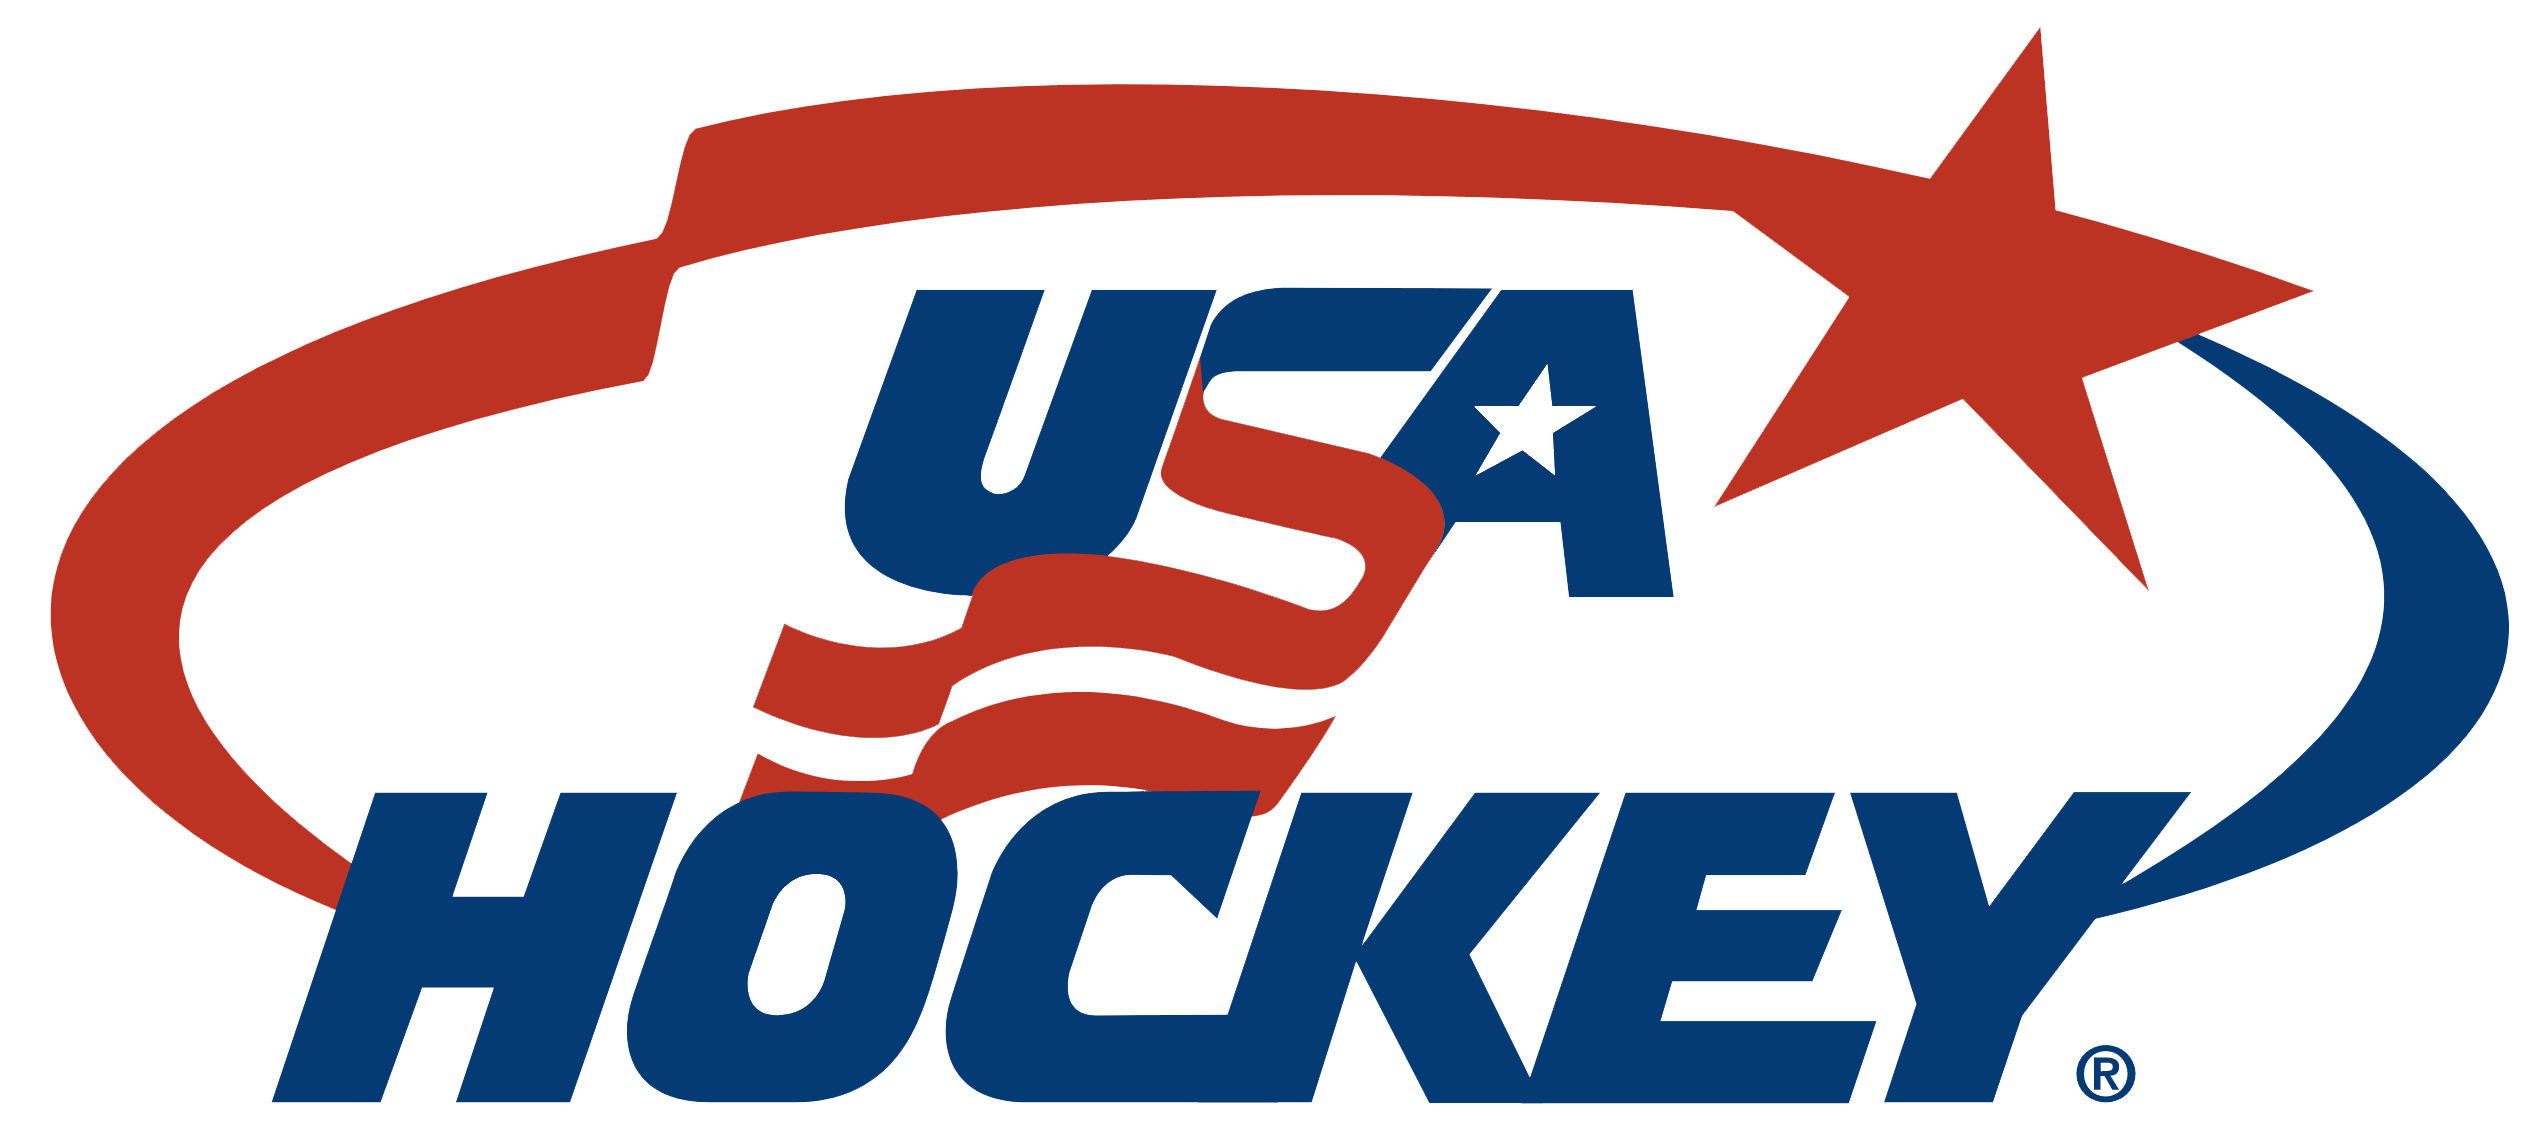 USA Hockey logo featuring bold 'USA HOCKEY' text with a star graphic. Click to visit the official website of USA Hockey.